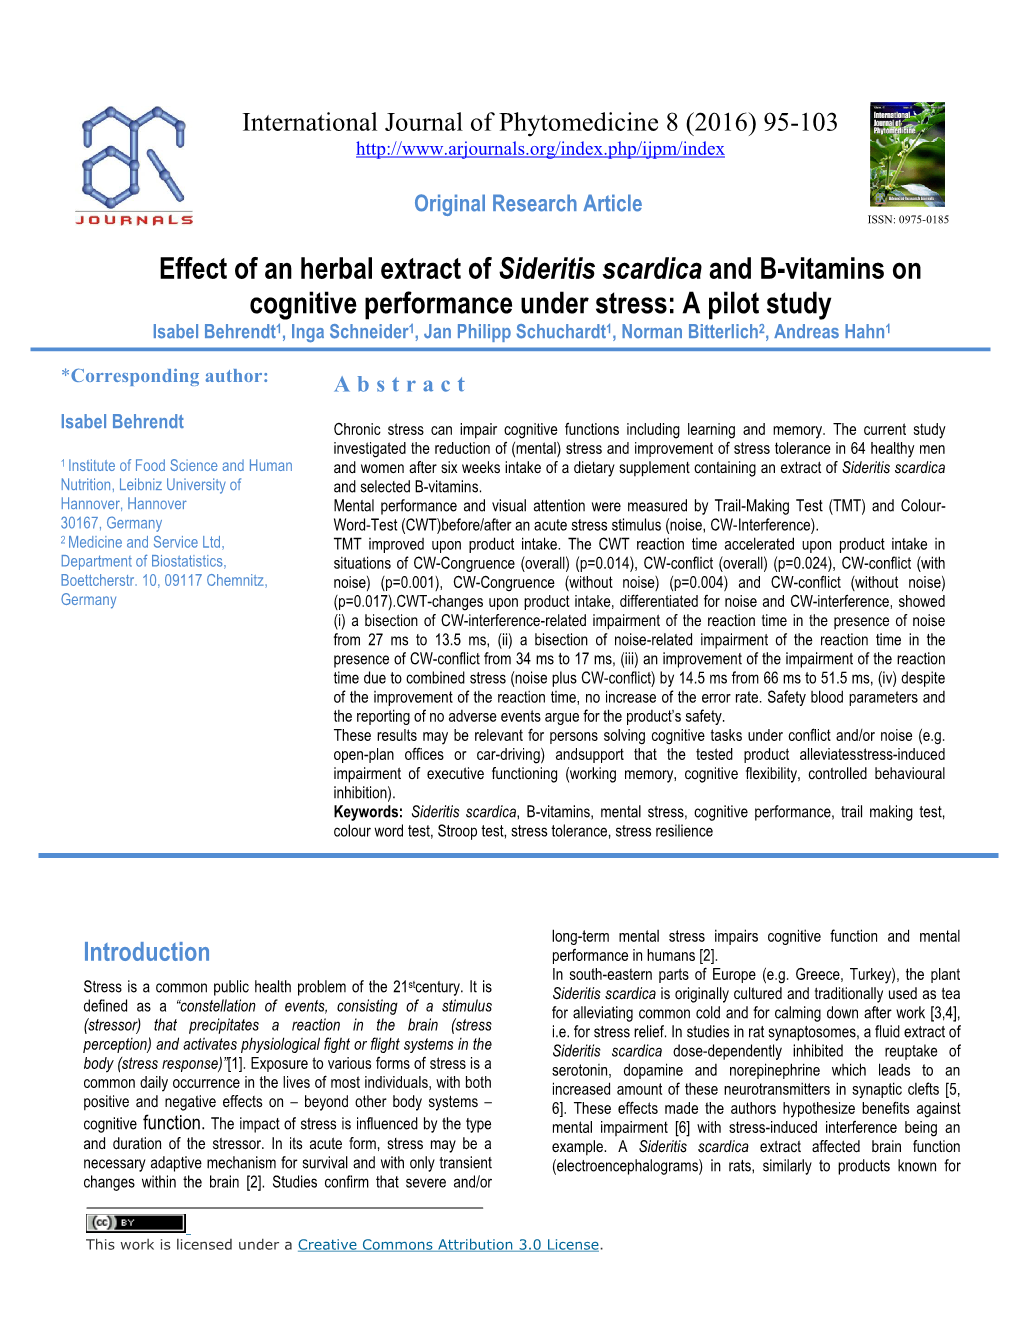 Effect of an Herbal Extract of Sideritis Scardica and B-Vitamins on Cognitive Performance Under Stress: a Pilot Study